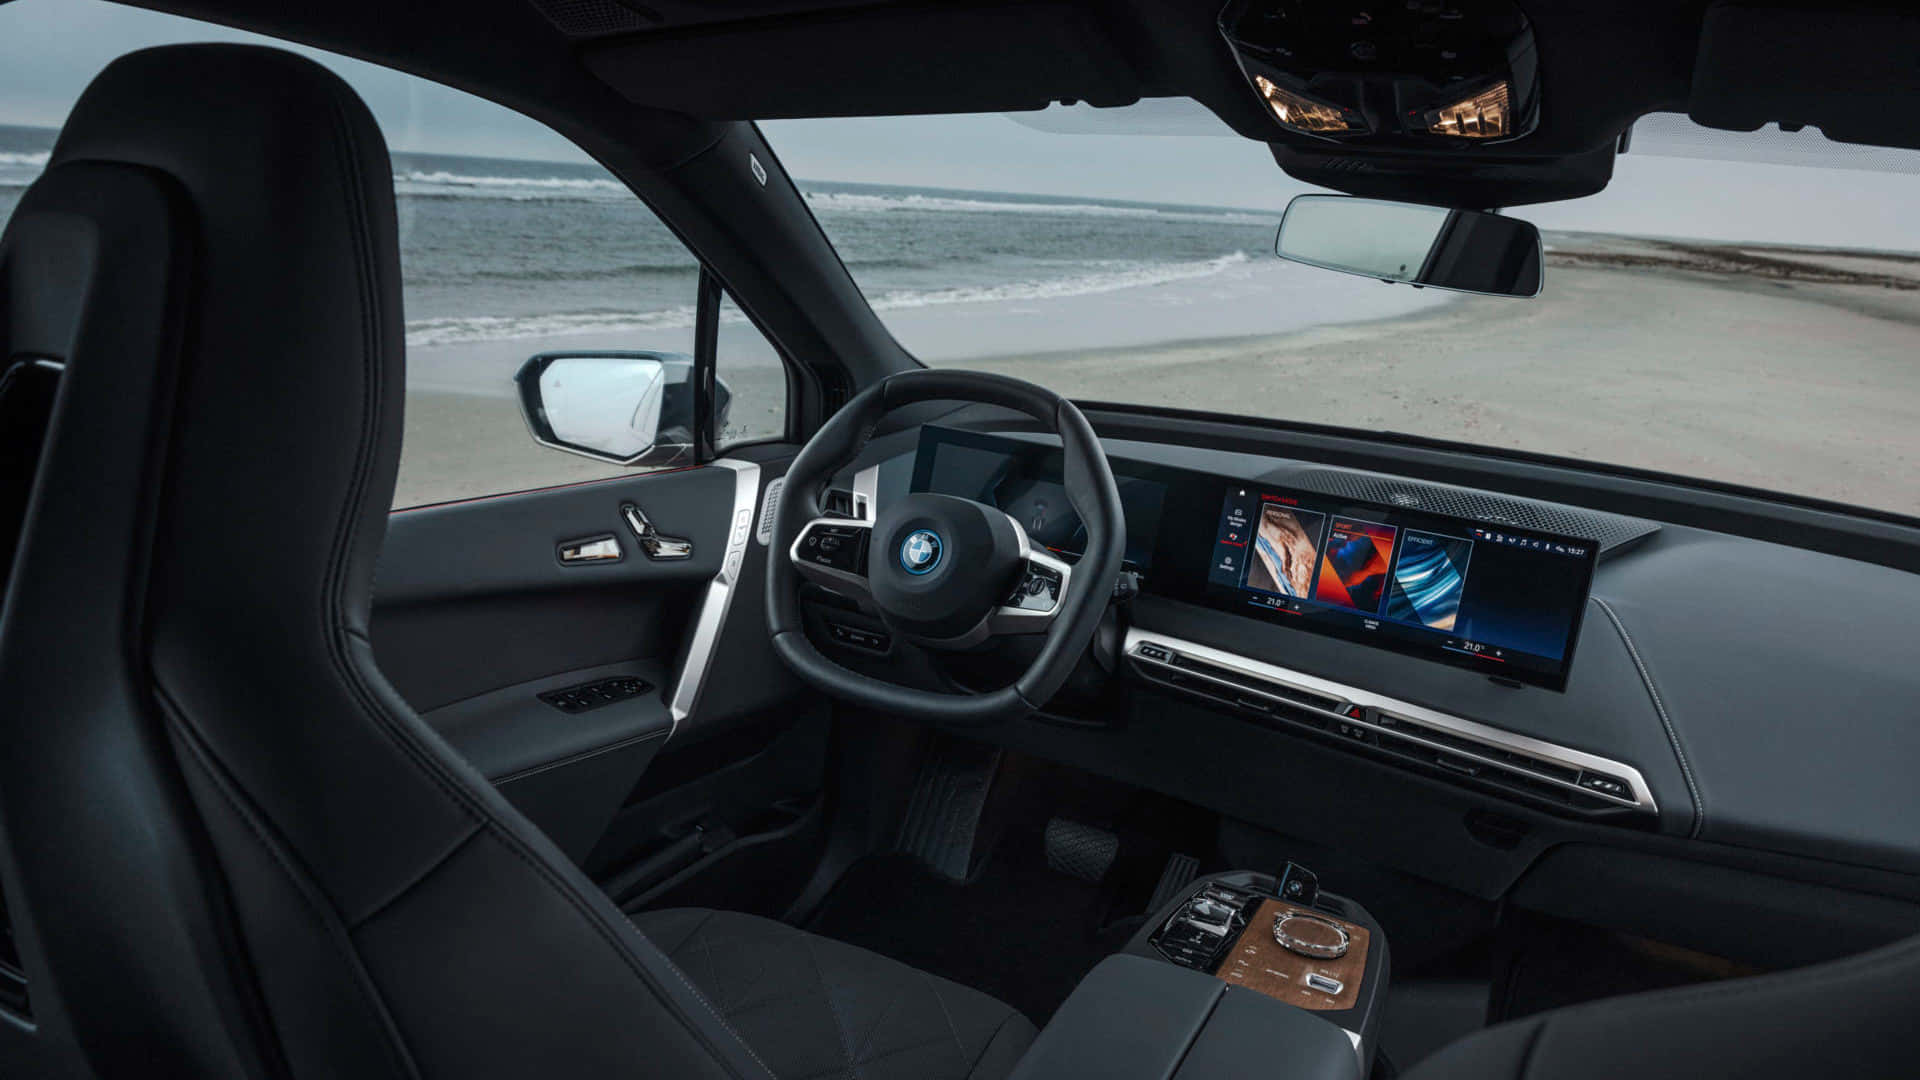 The Interior Of A Bmw X3 Wallpaper